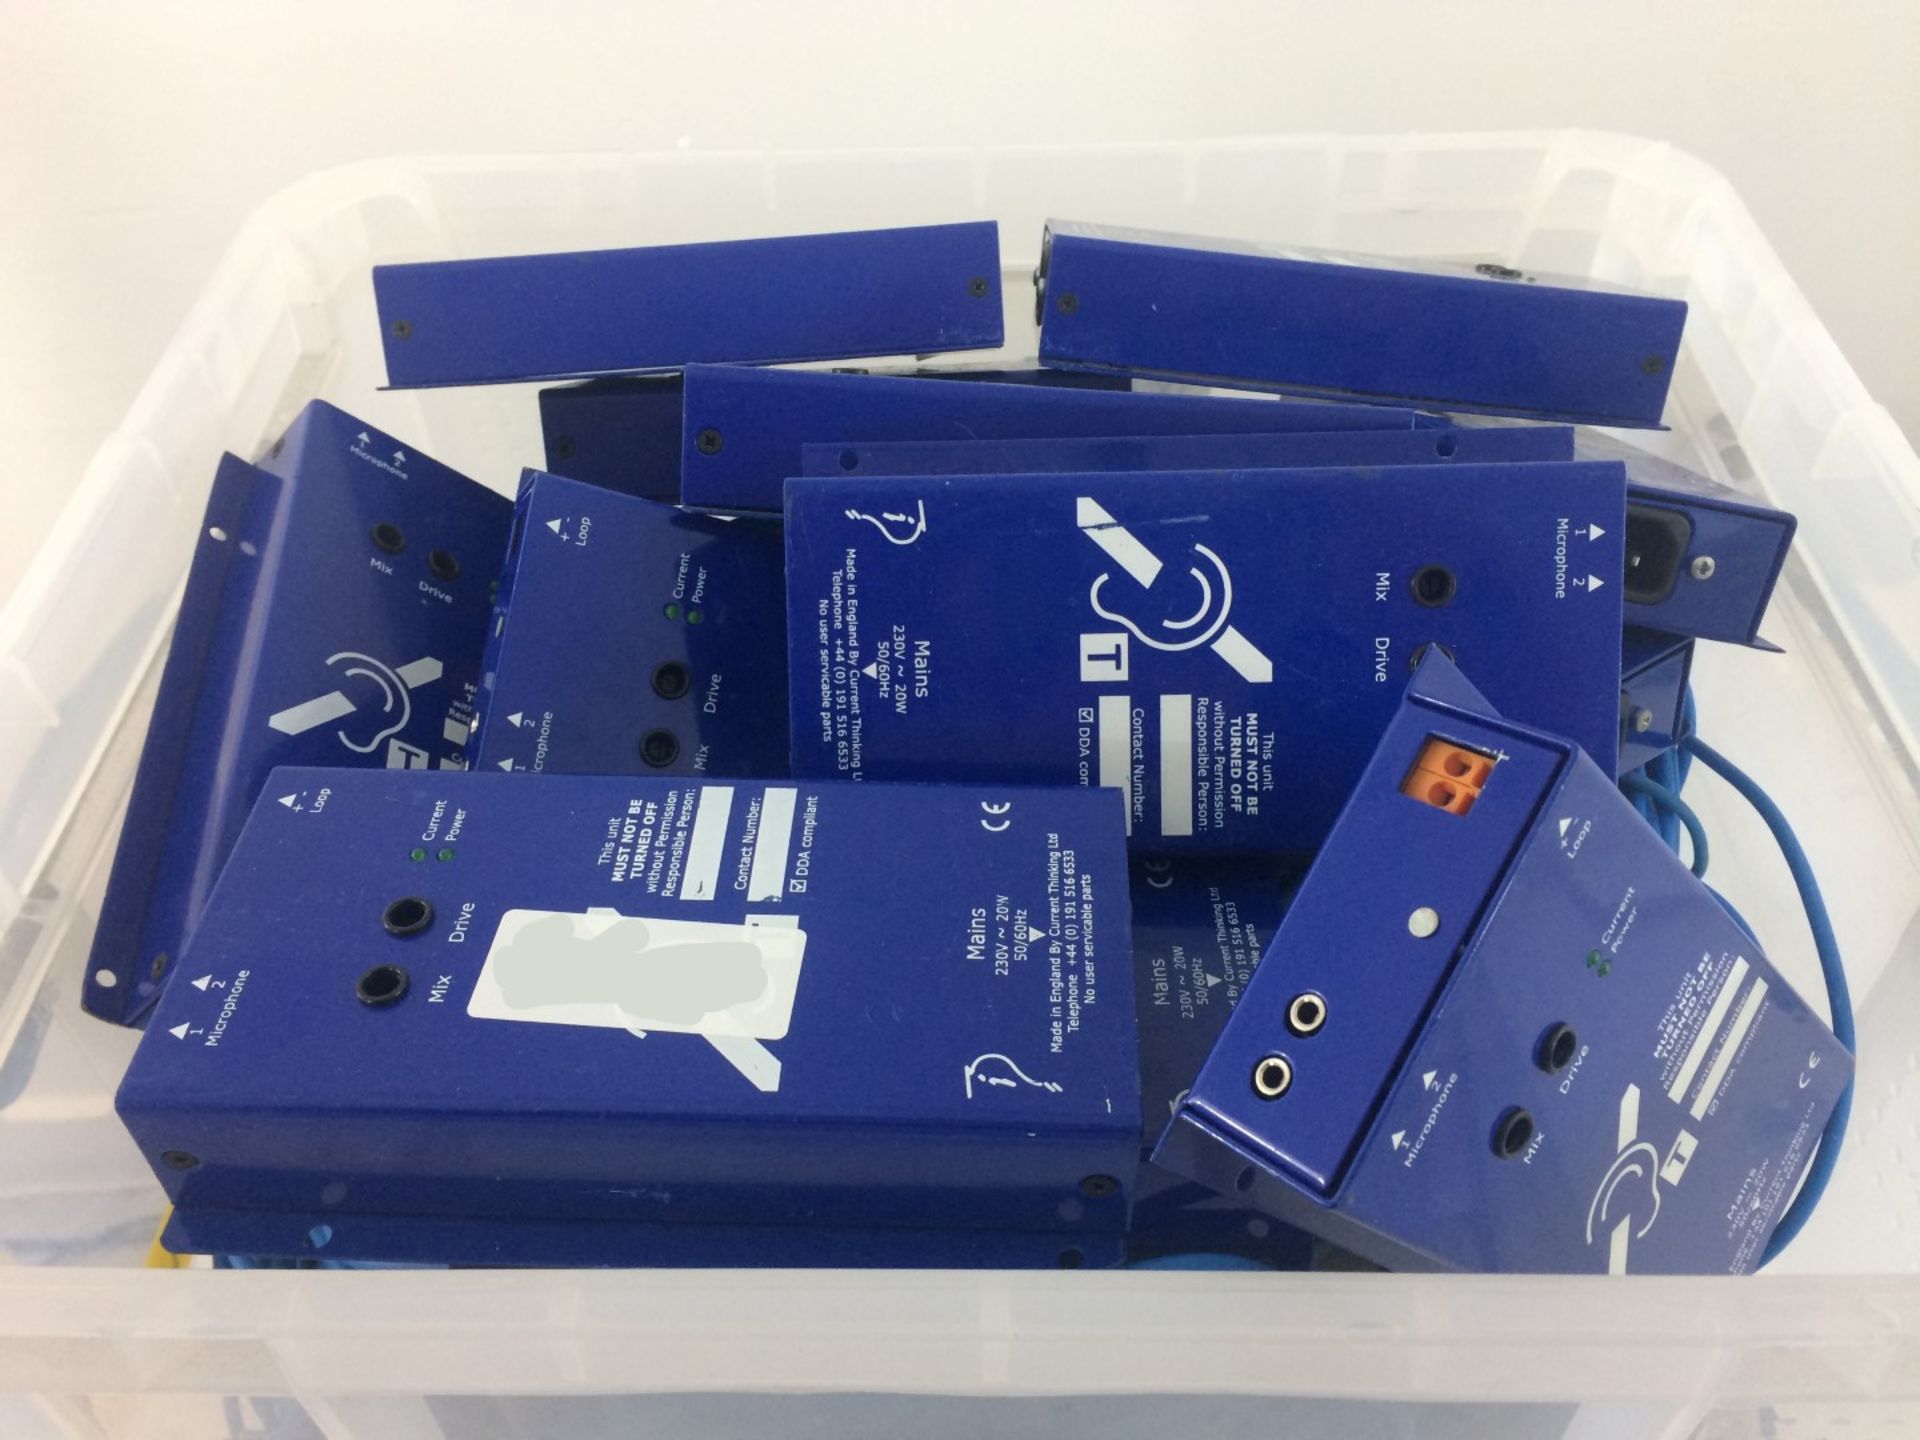 12 x INDUCTION LOOP SYSTEM INDUCTION BOXES Including CABLES (IN BOX) - Ref: 759 - CL581 - - Image 3 of 3